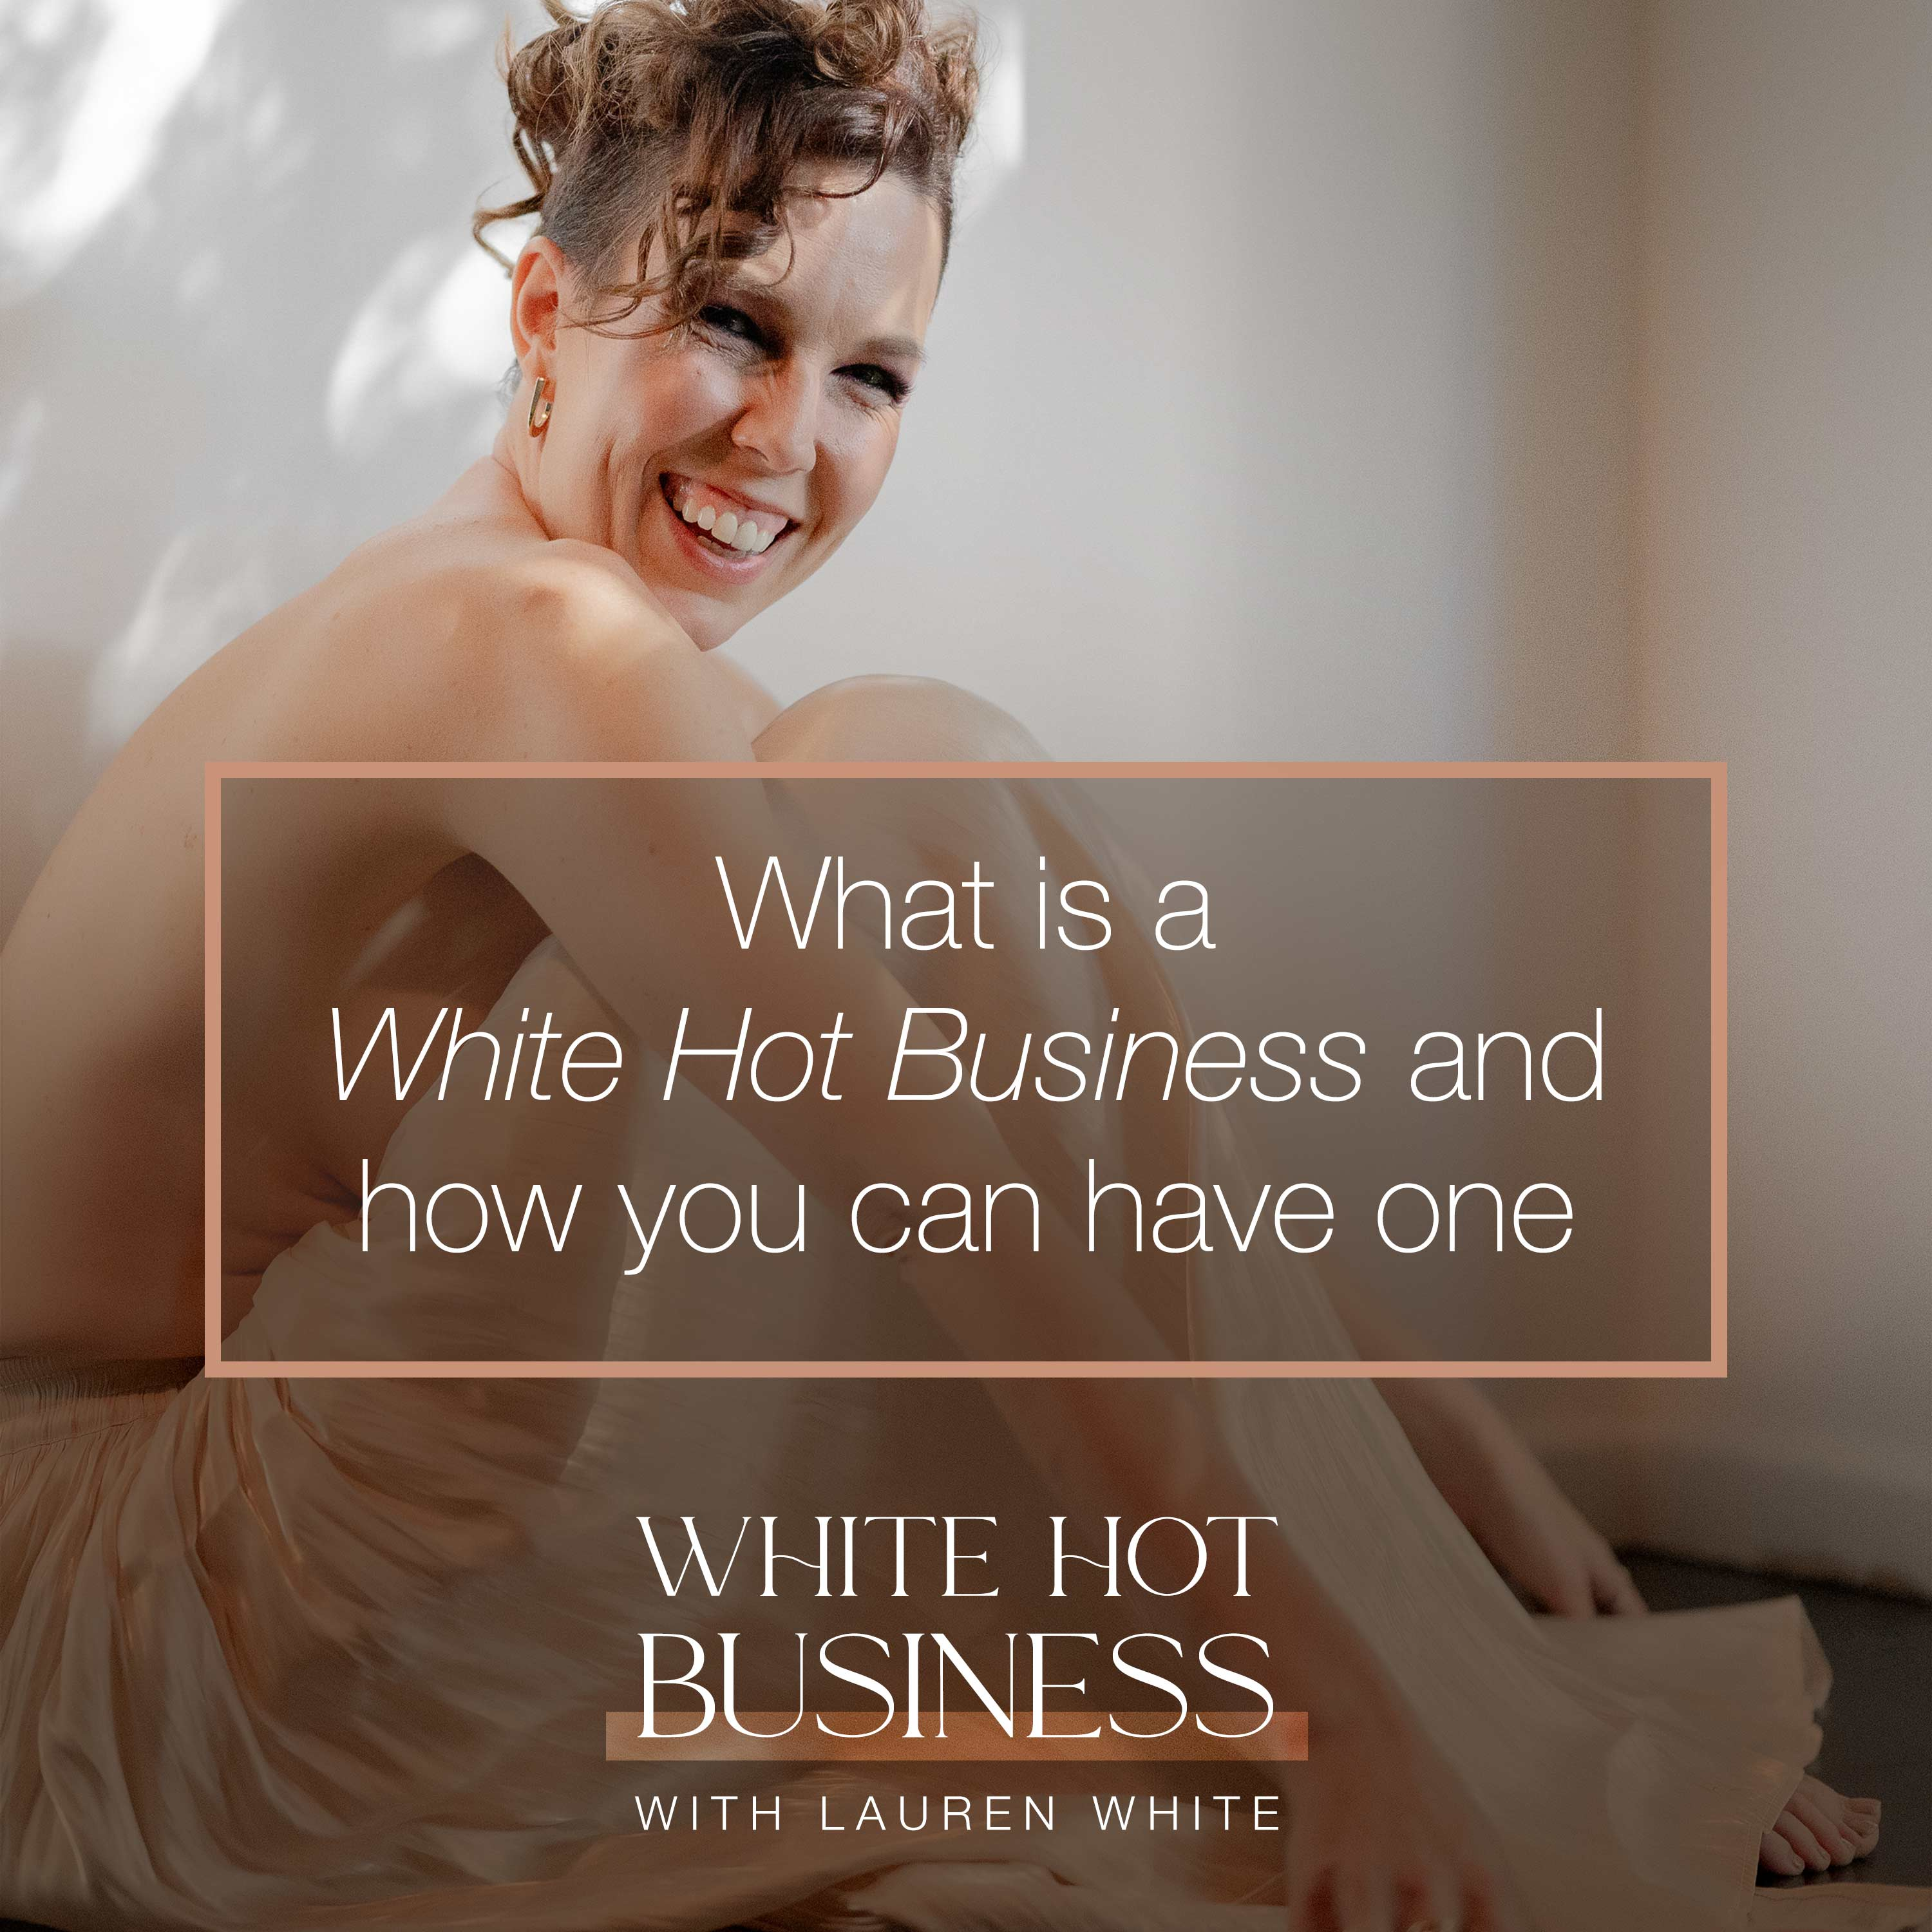 What is a White Hot Business and how you can have one